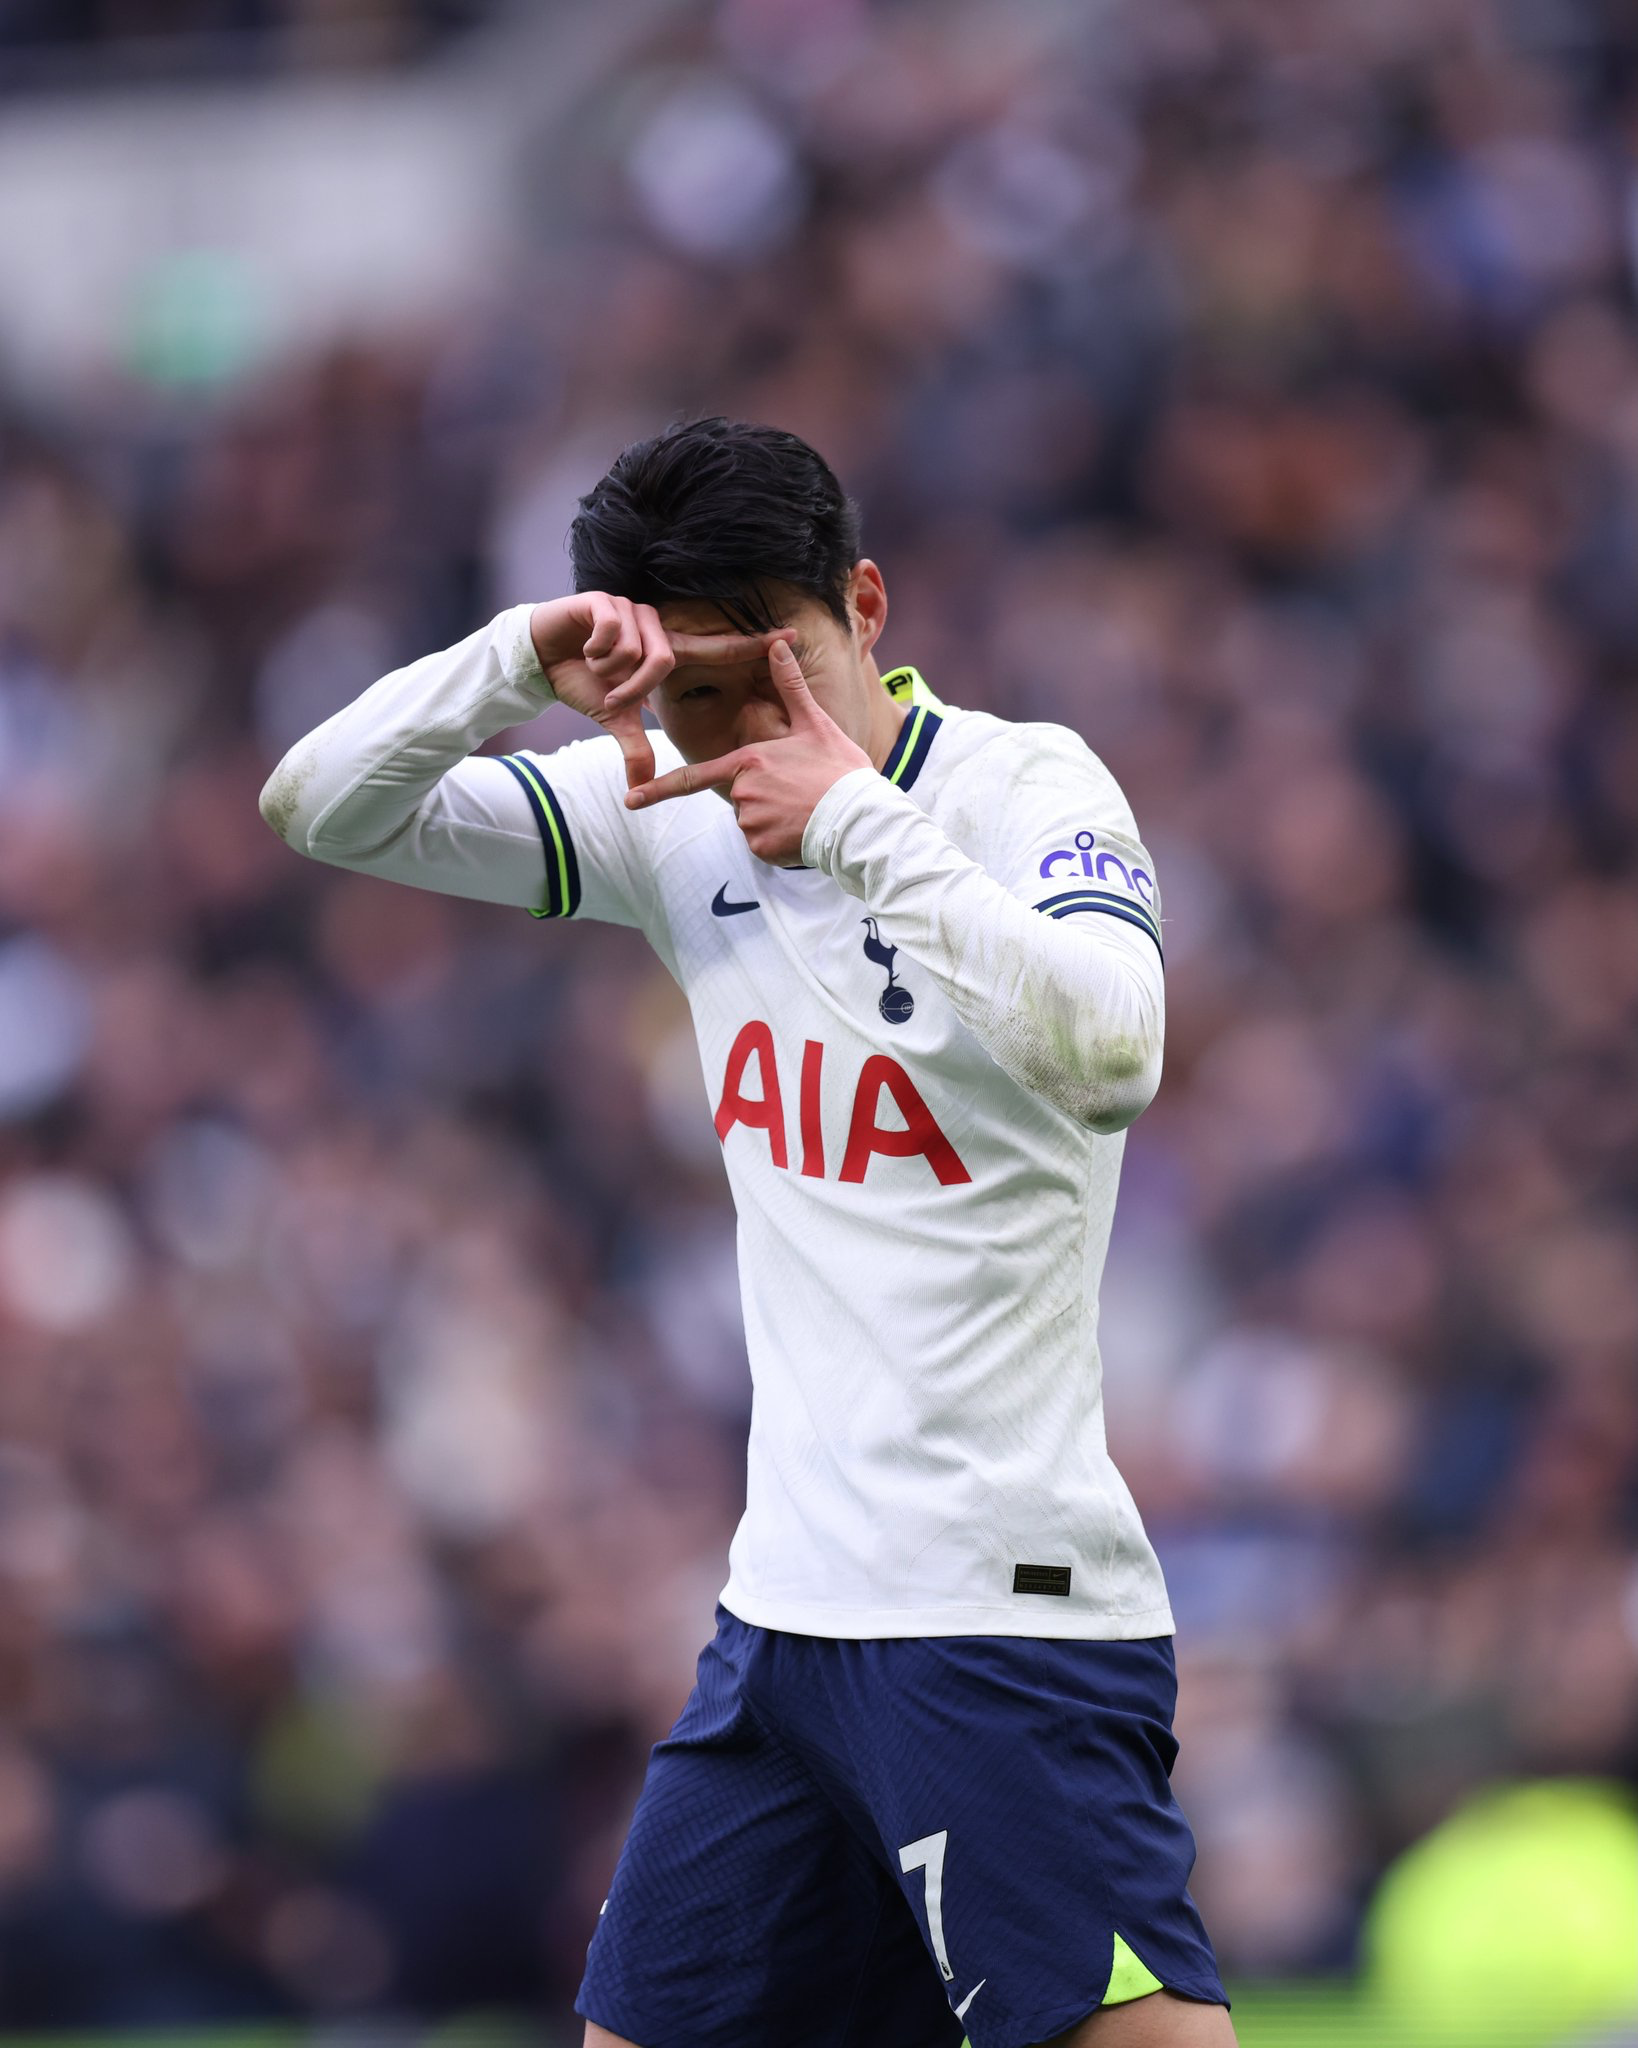 Son Heung-min does his signature photo frame goal celebration.